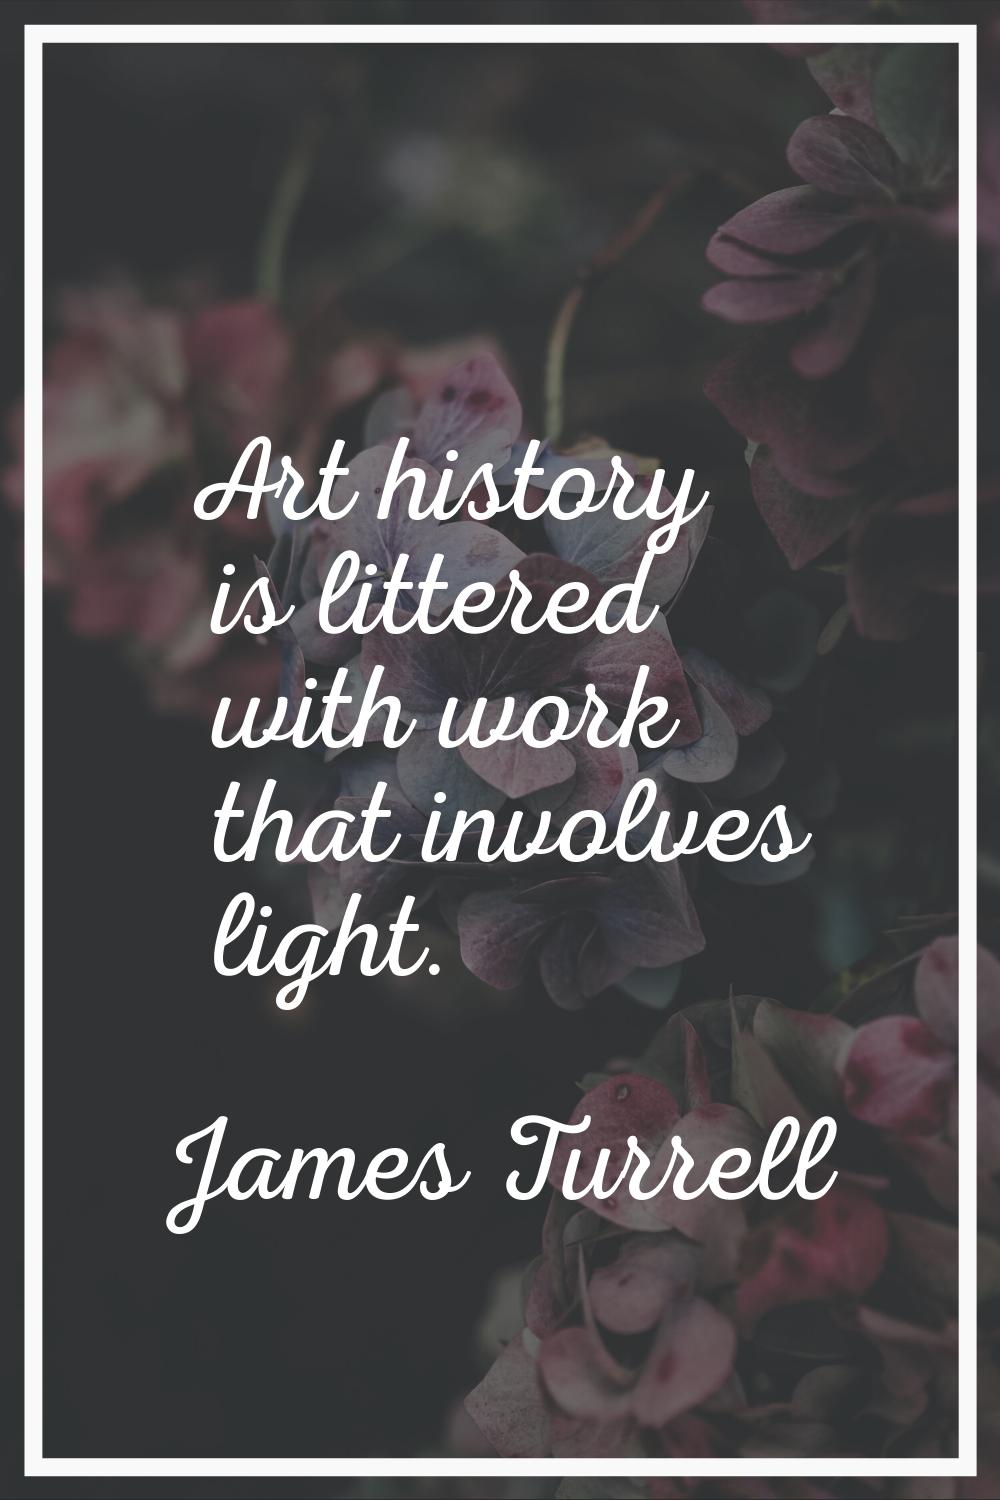 Art history is littered with work that involves light.